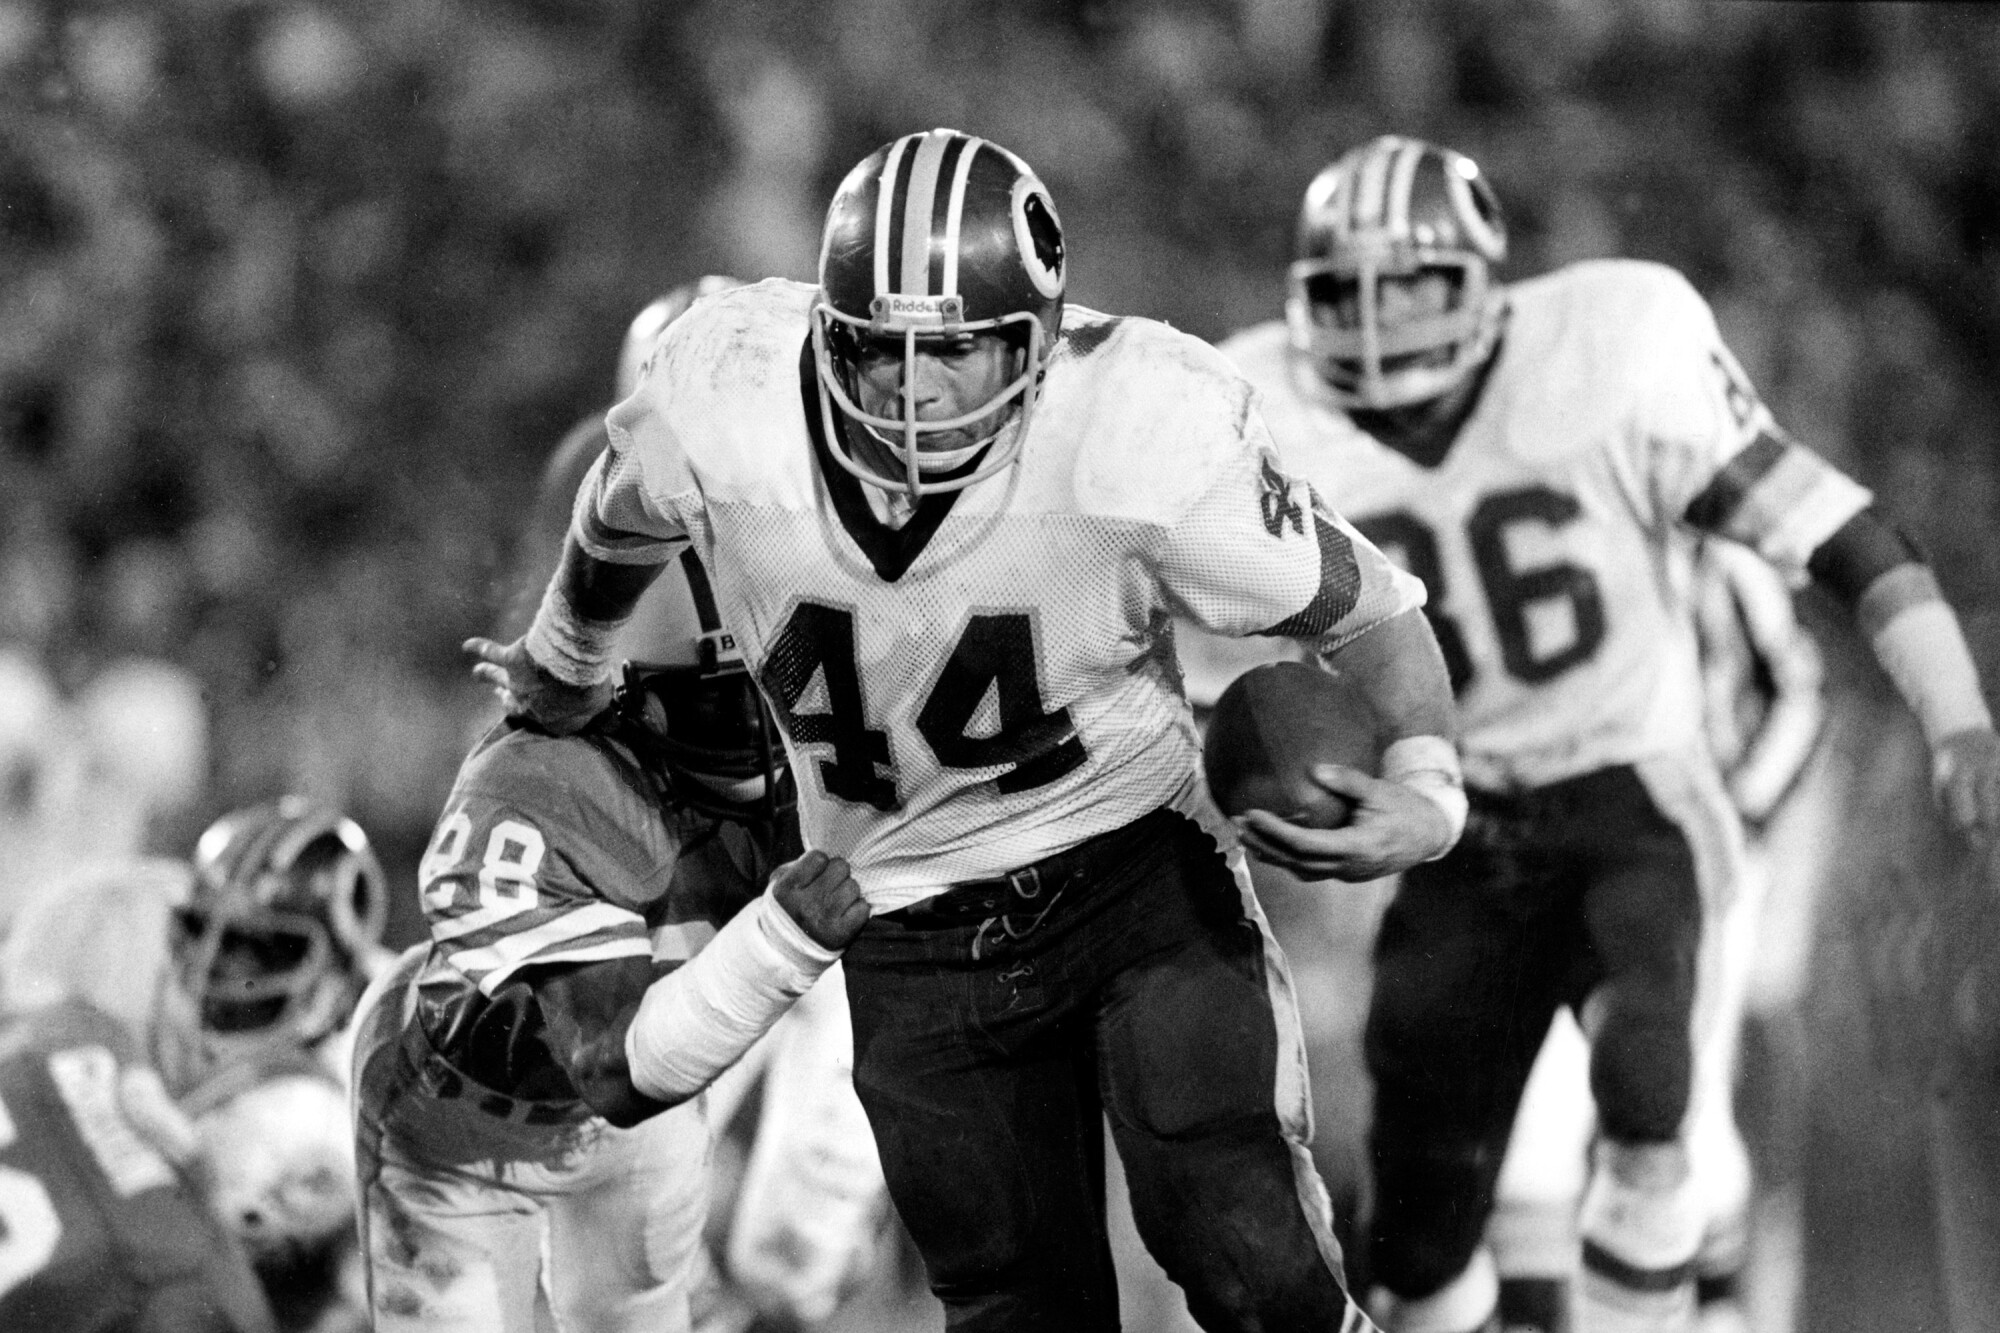 Washington running back John Riggins eludes a tackle attempt by Miami Dolphins' Don McNeal.